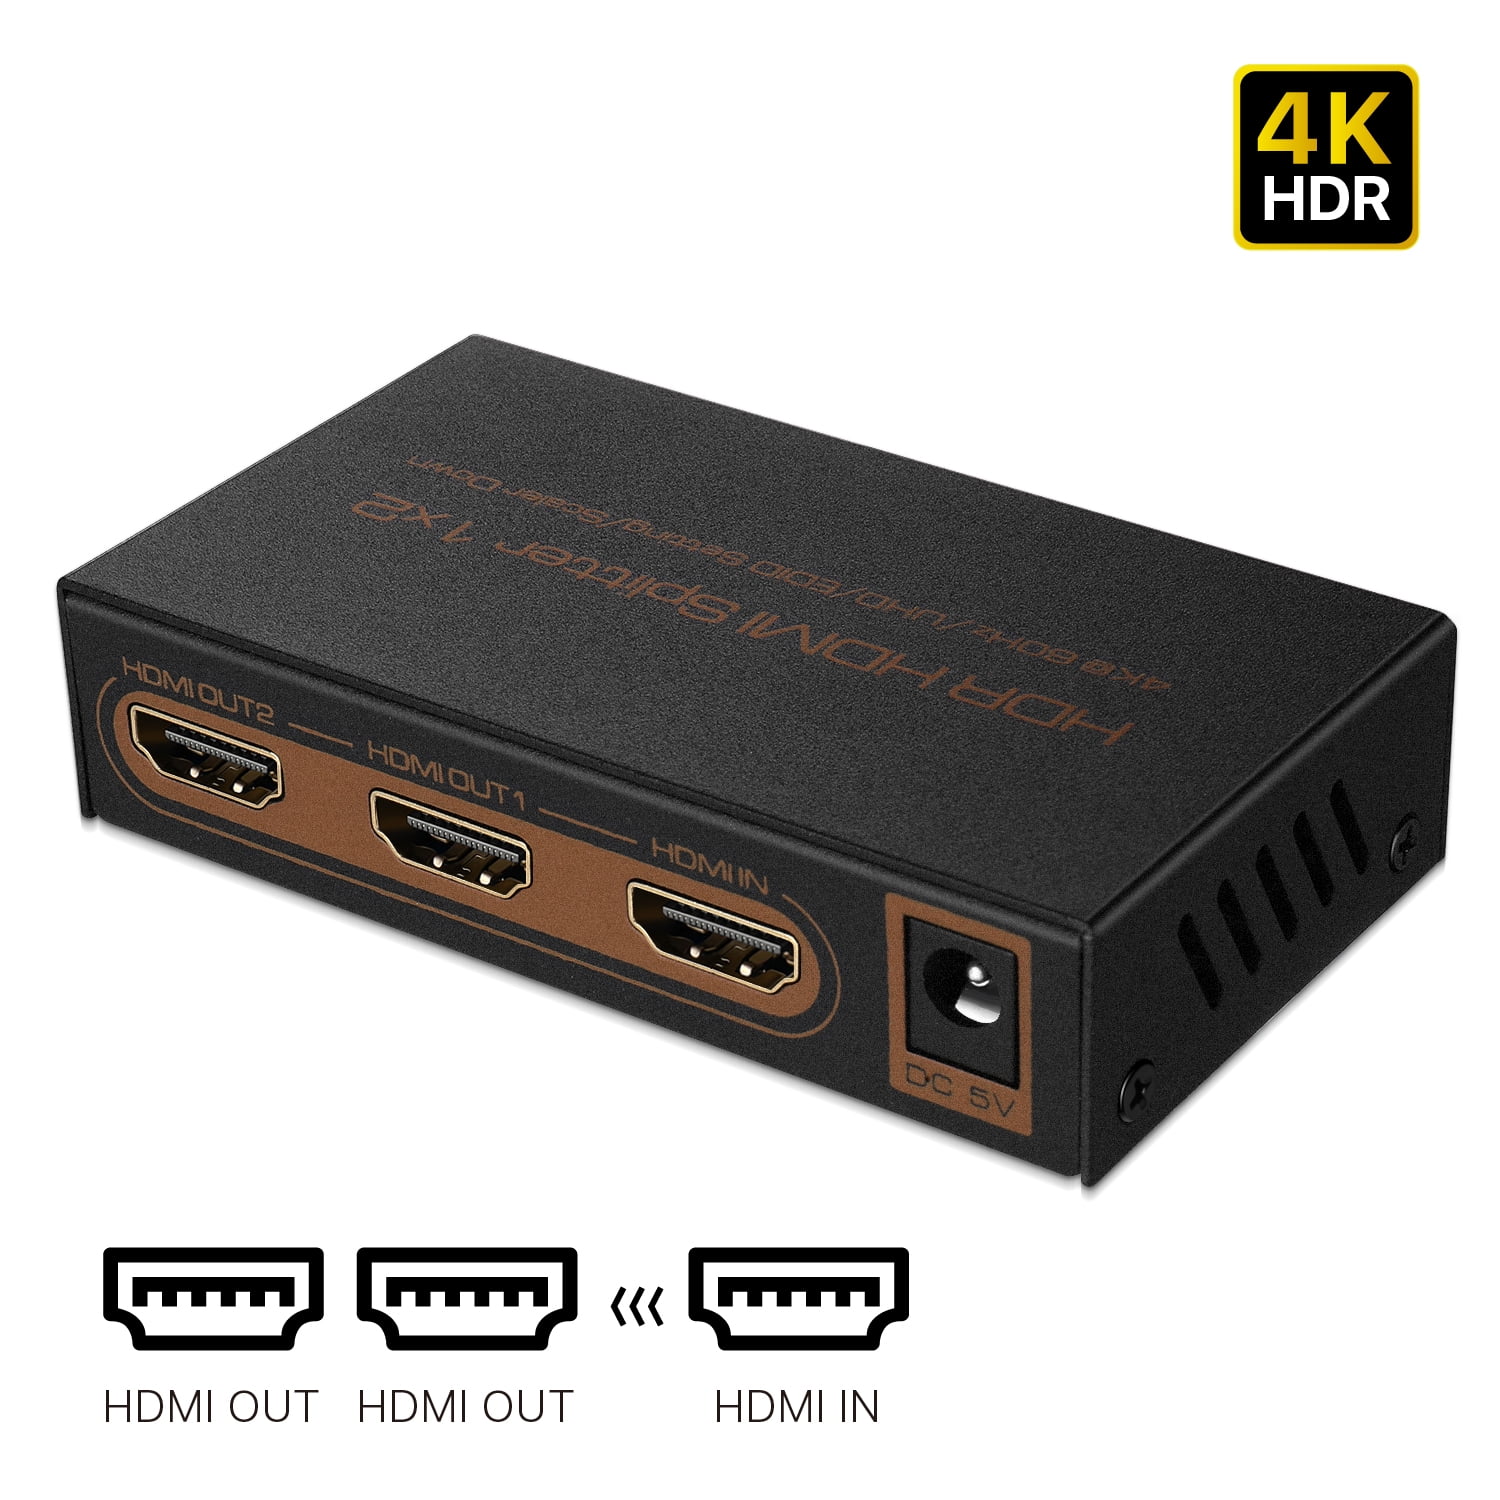 tvetydig Ombord Fortælle HDMI Splitter 1 in 2 out Intelligent 4K 60Hz HDMI 2.0 Splitter 1x2 - EDID,  Auto Scaling Resolution, HDR Dolby Vision / Atmos, HDCP 2.2, 18Gbps High-Speed  HDMI Video Audio Distribution Split Box - Walmart.com